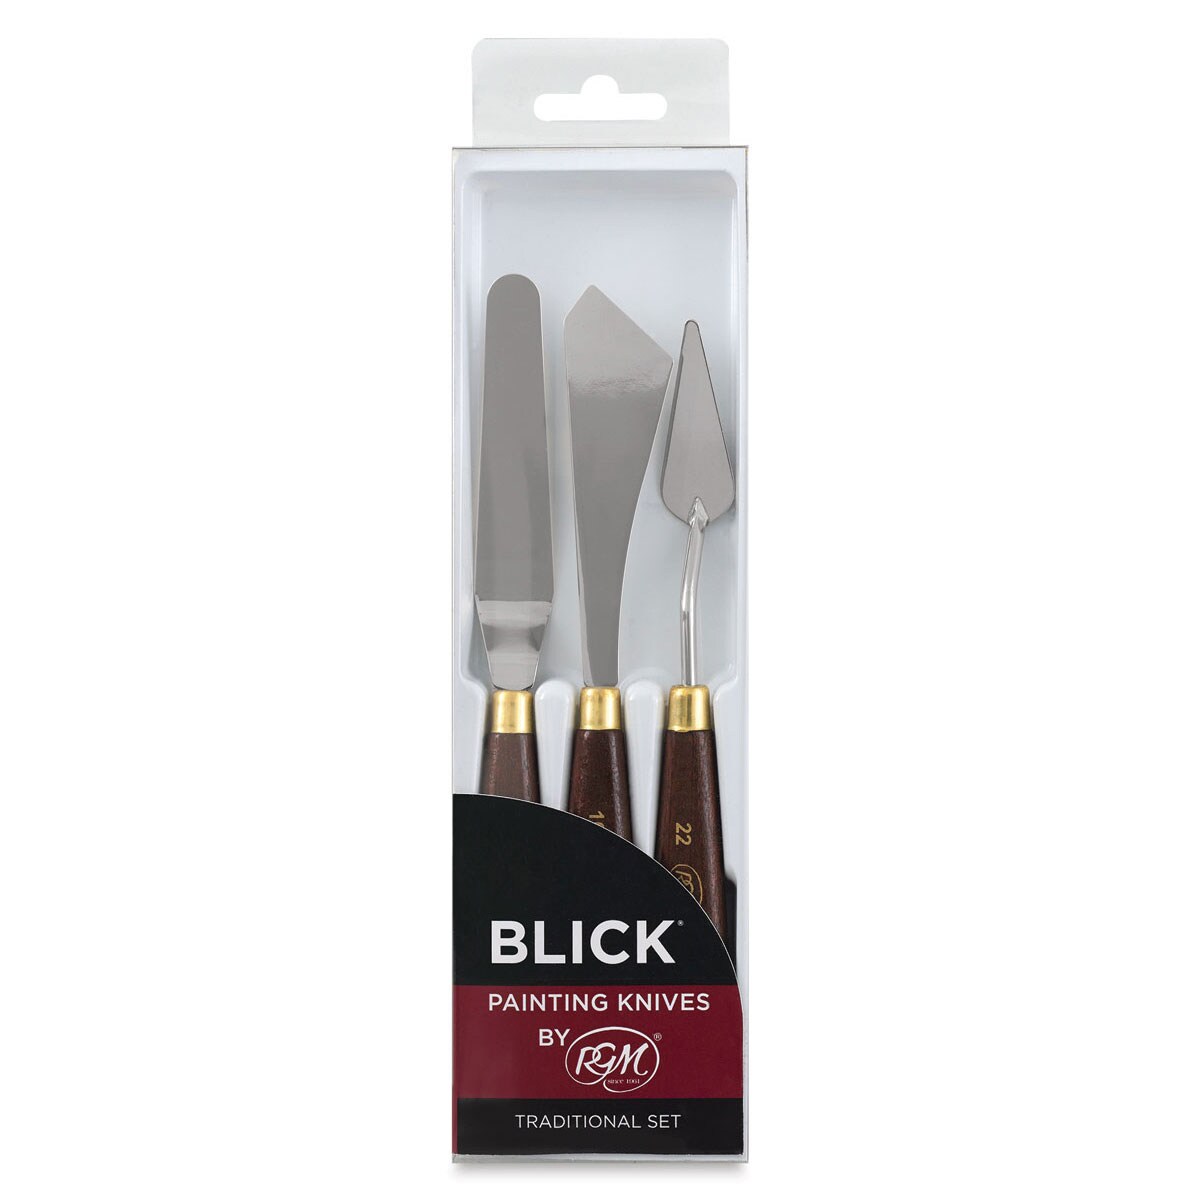 Blick Painting Knives - Traditional Knives, Set of 3